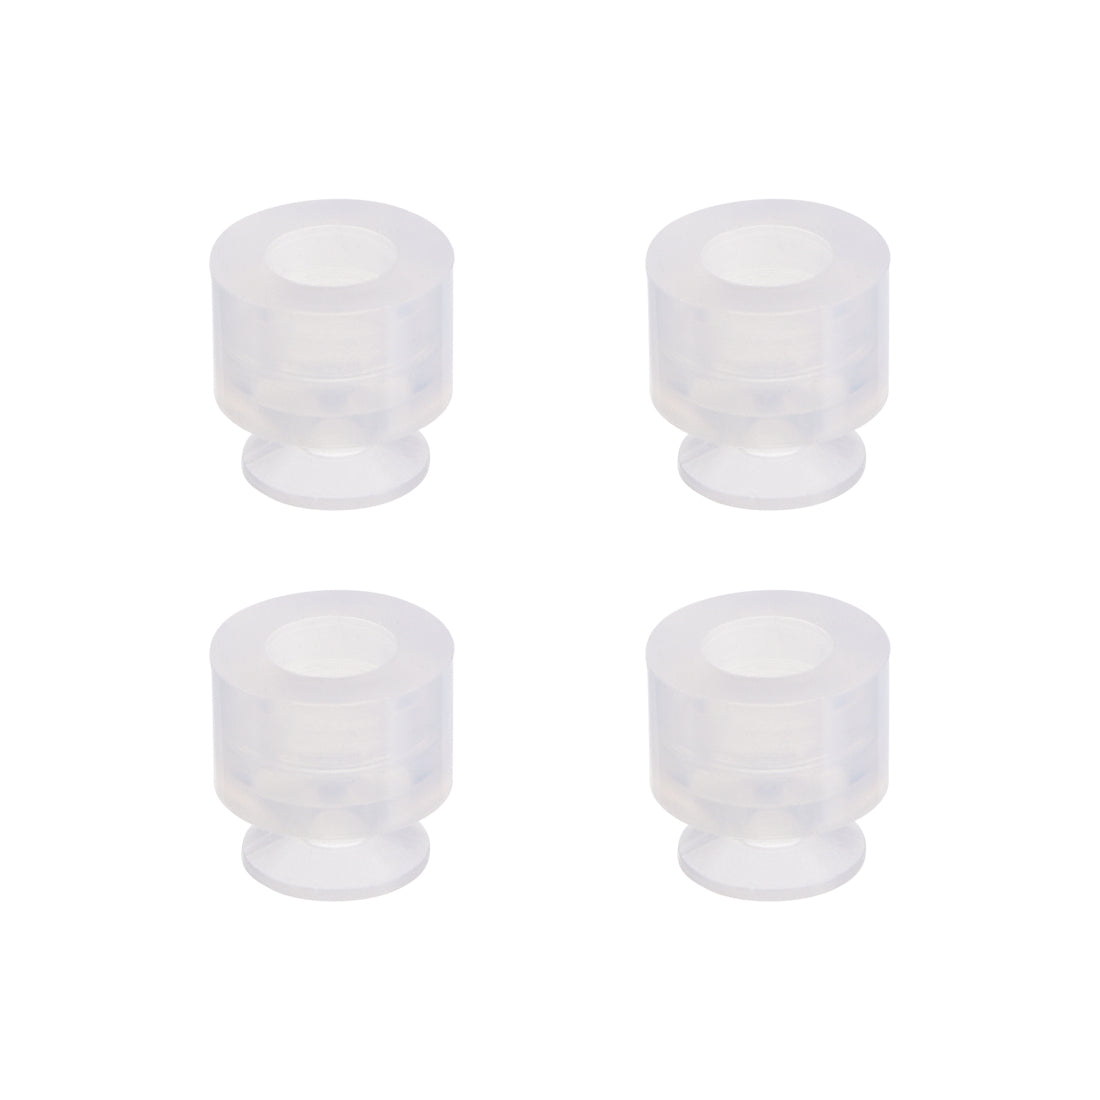 uxcell Uxcell Clear White Soft Silicone Waterproof  Miniature Vacuum Suction Cup 8mmx5mm Bellows Suction Cup,4pcs